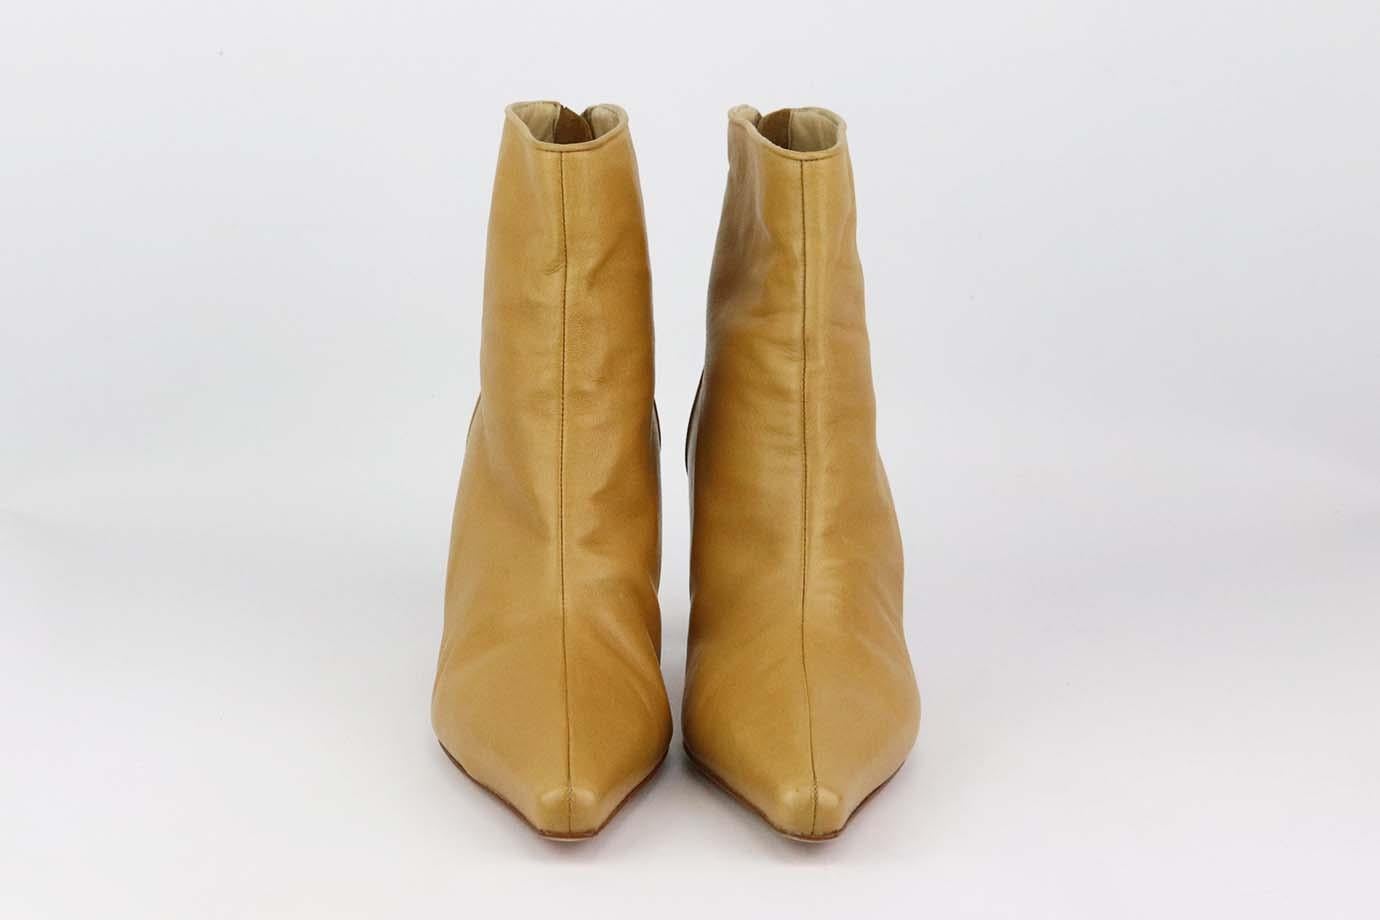 These ankle boots by Manolo Blahnik are a classic style that will never date, made in Italy from supple tan leather, they have pointed. Heel measures approximately 63 mm/ 2.5 inches. Tan leather. Zip fastening at back. Comes with dustbag. Size: EU